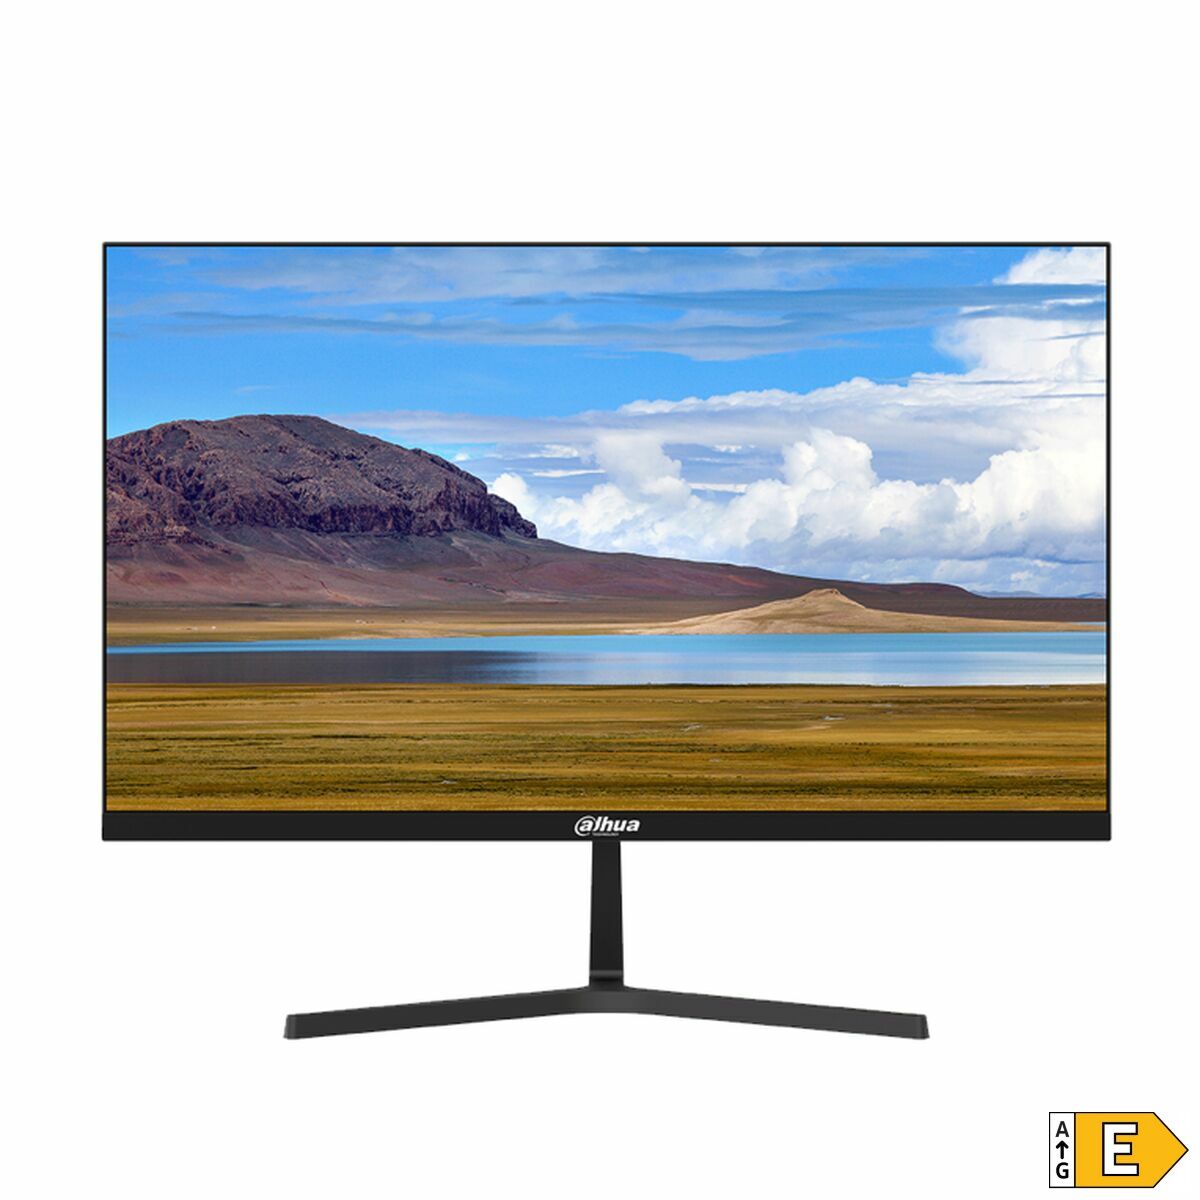 Monitor Dahua Dhi-lm27-b200s 27" Full HD LED Black 75 Hz, Dahua, Computing, monitor-dahua-dhi-lm27-b200s-27-full-hd-led-black-75-hz, :Full HD, Brand_Dahua, category-reference-2609, category-reference-2642, category-reference-2644, category-reference-t-19685, computers / peripherals, Condition_NEW, office, Price_100 - 200, Teleworking, RiotNook